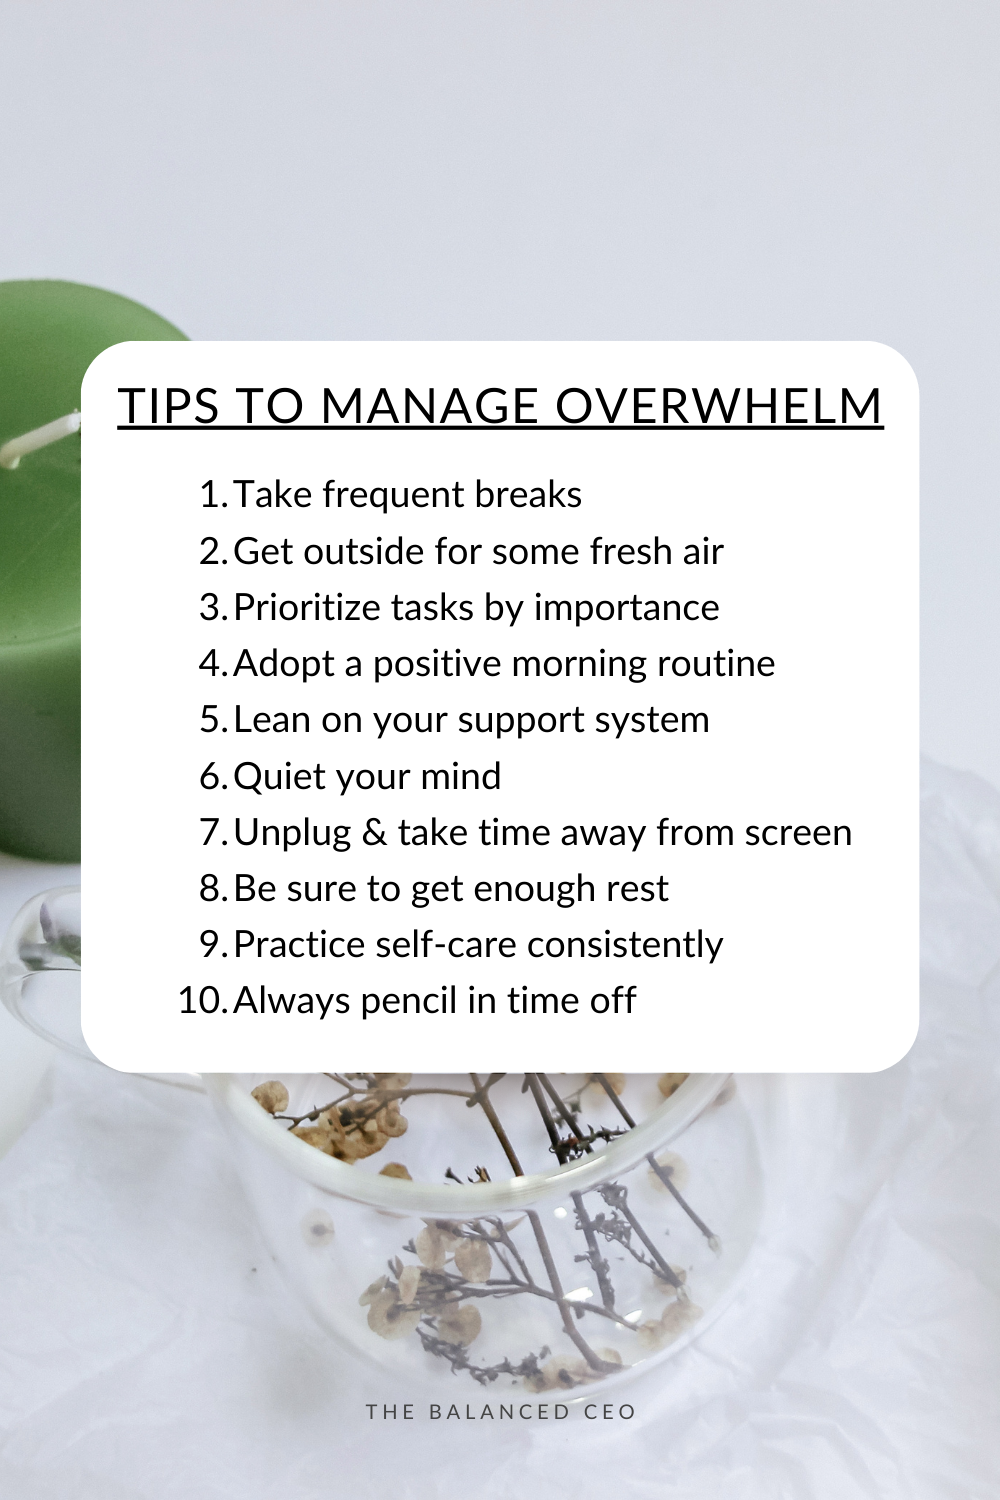 Tips to Manage Overwhelm